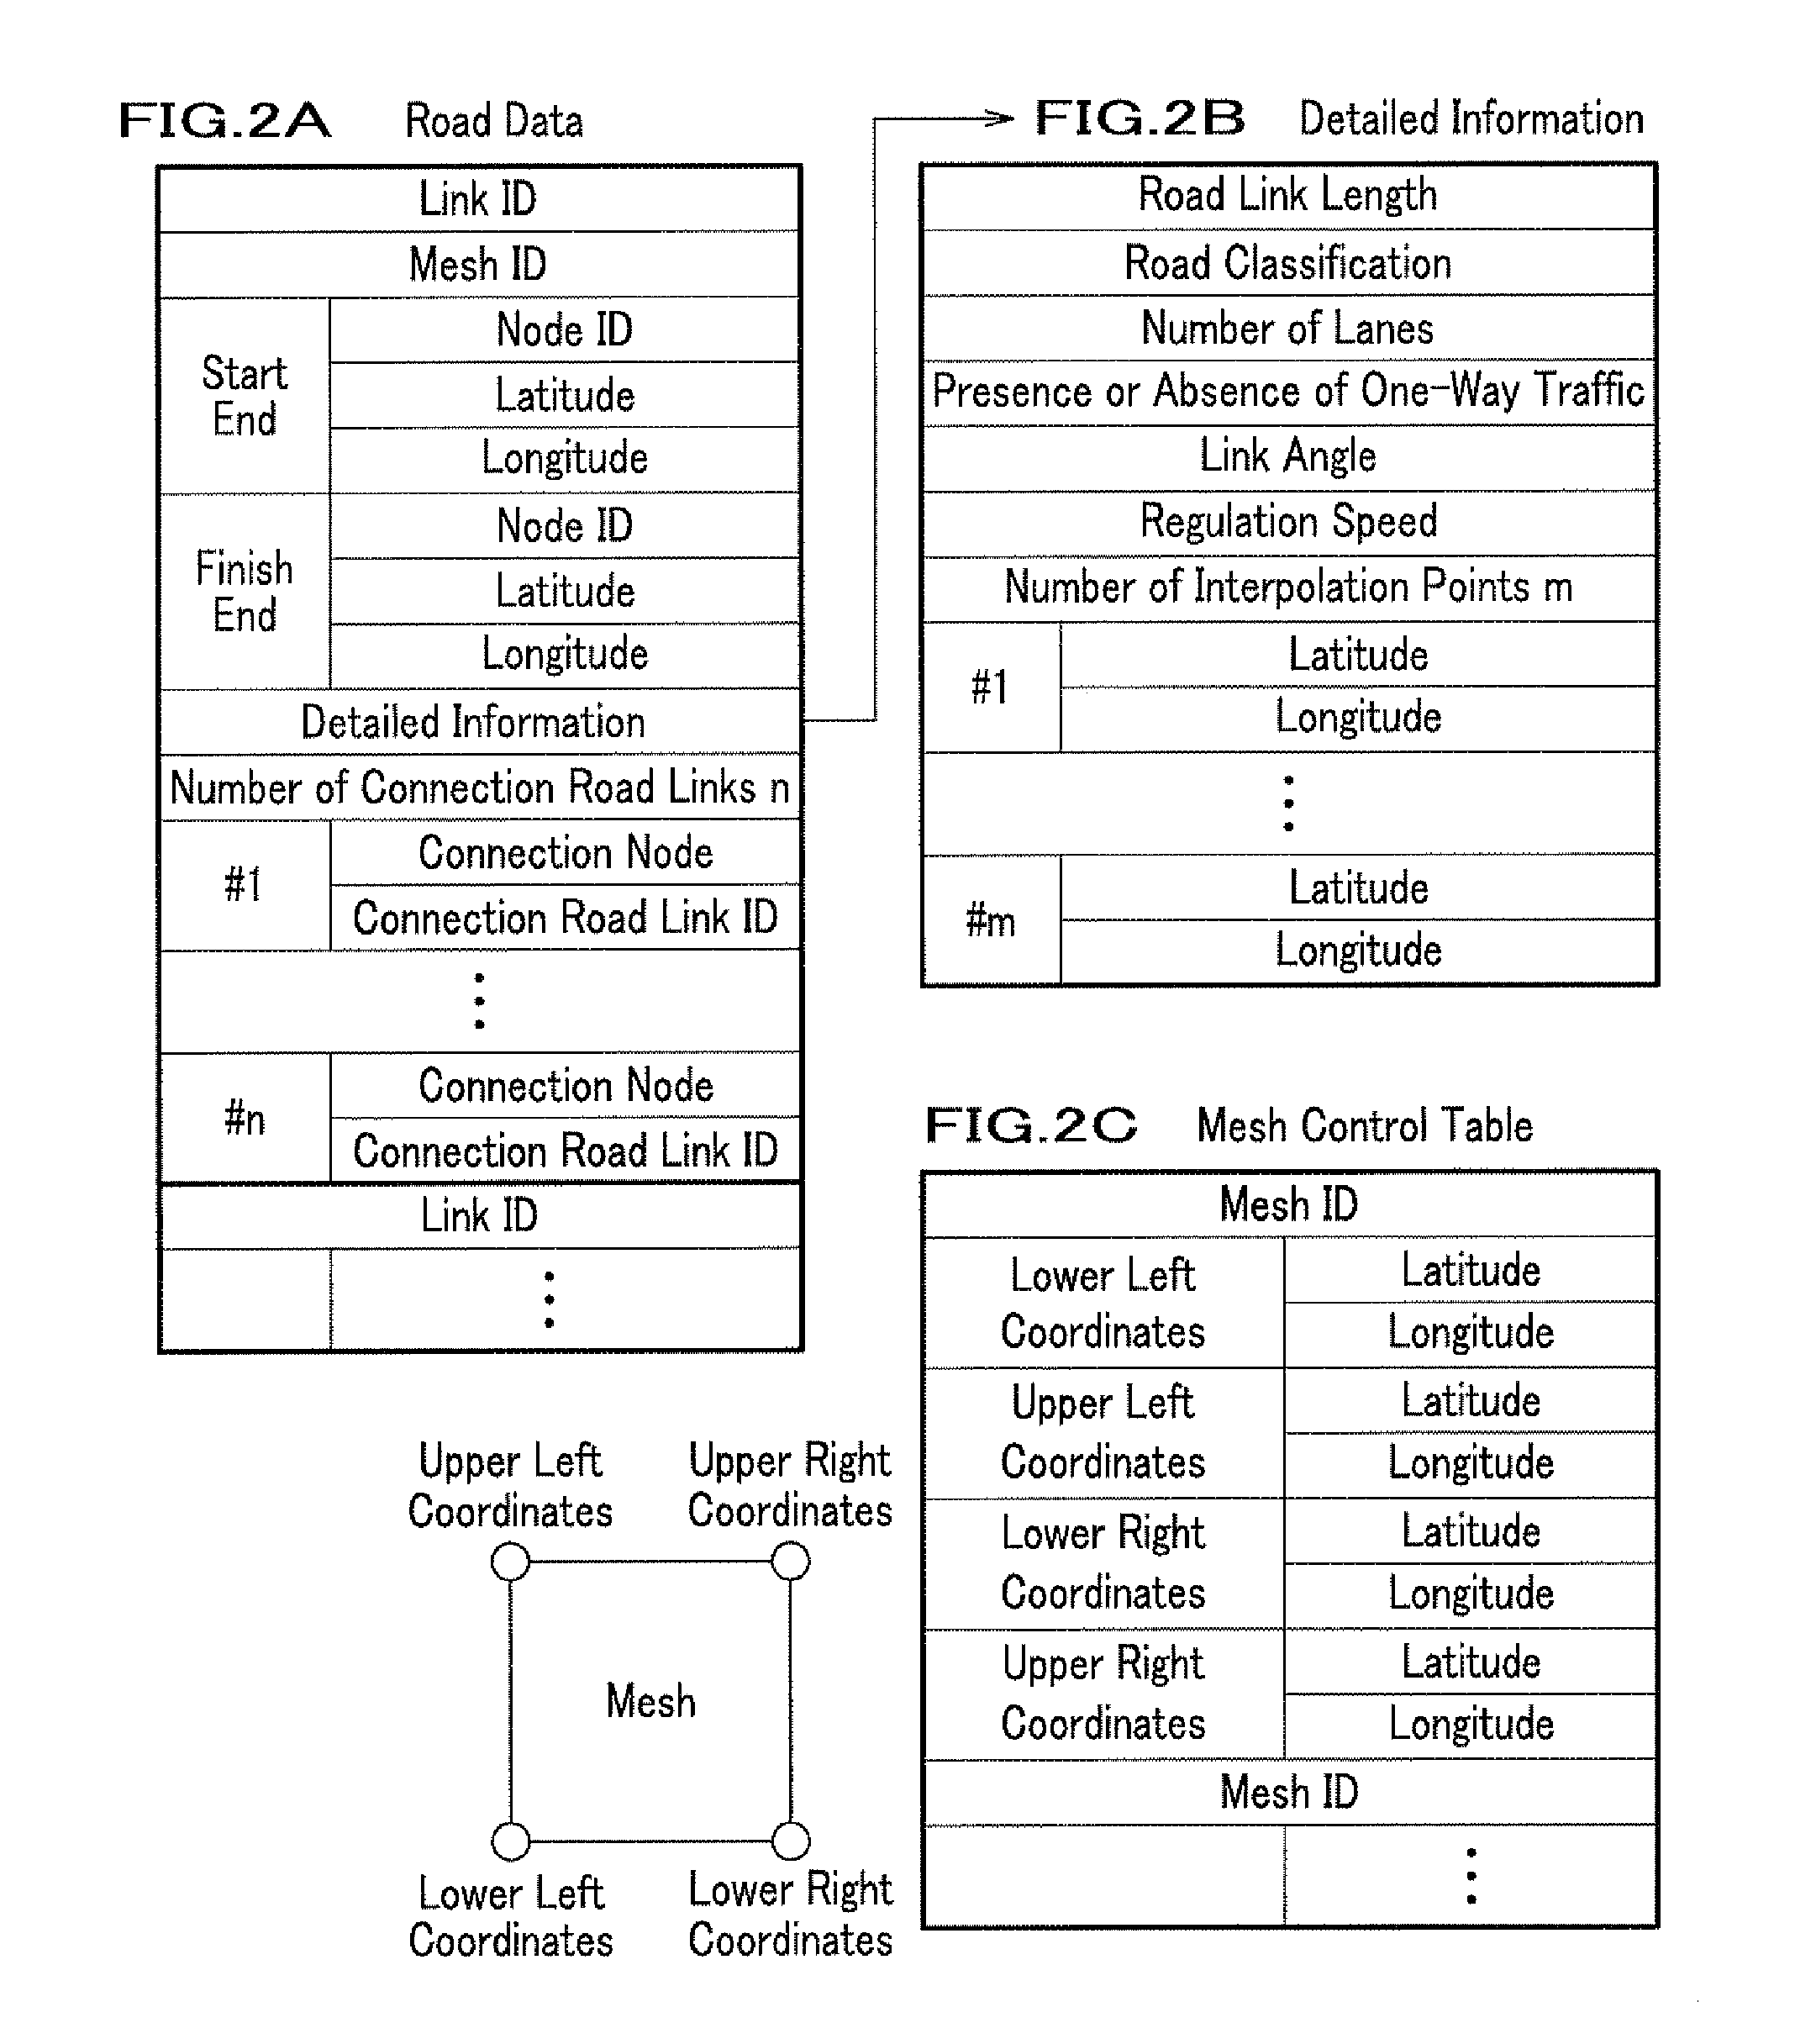 Position detection apparatus and position detection program